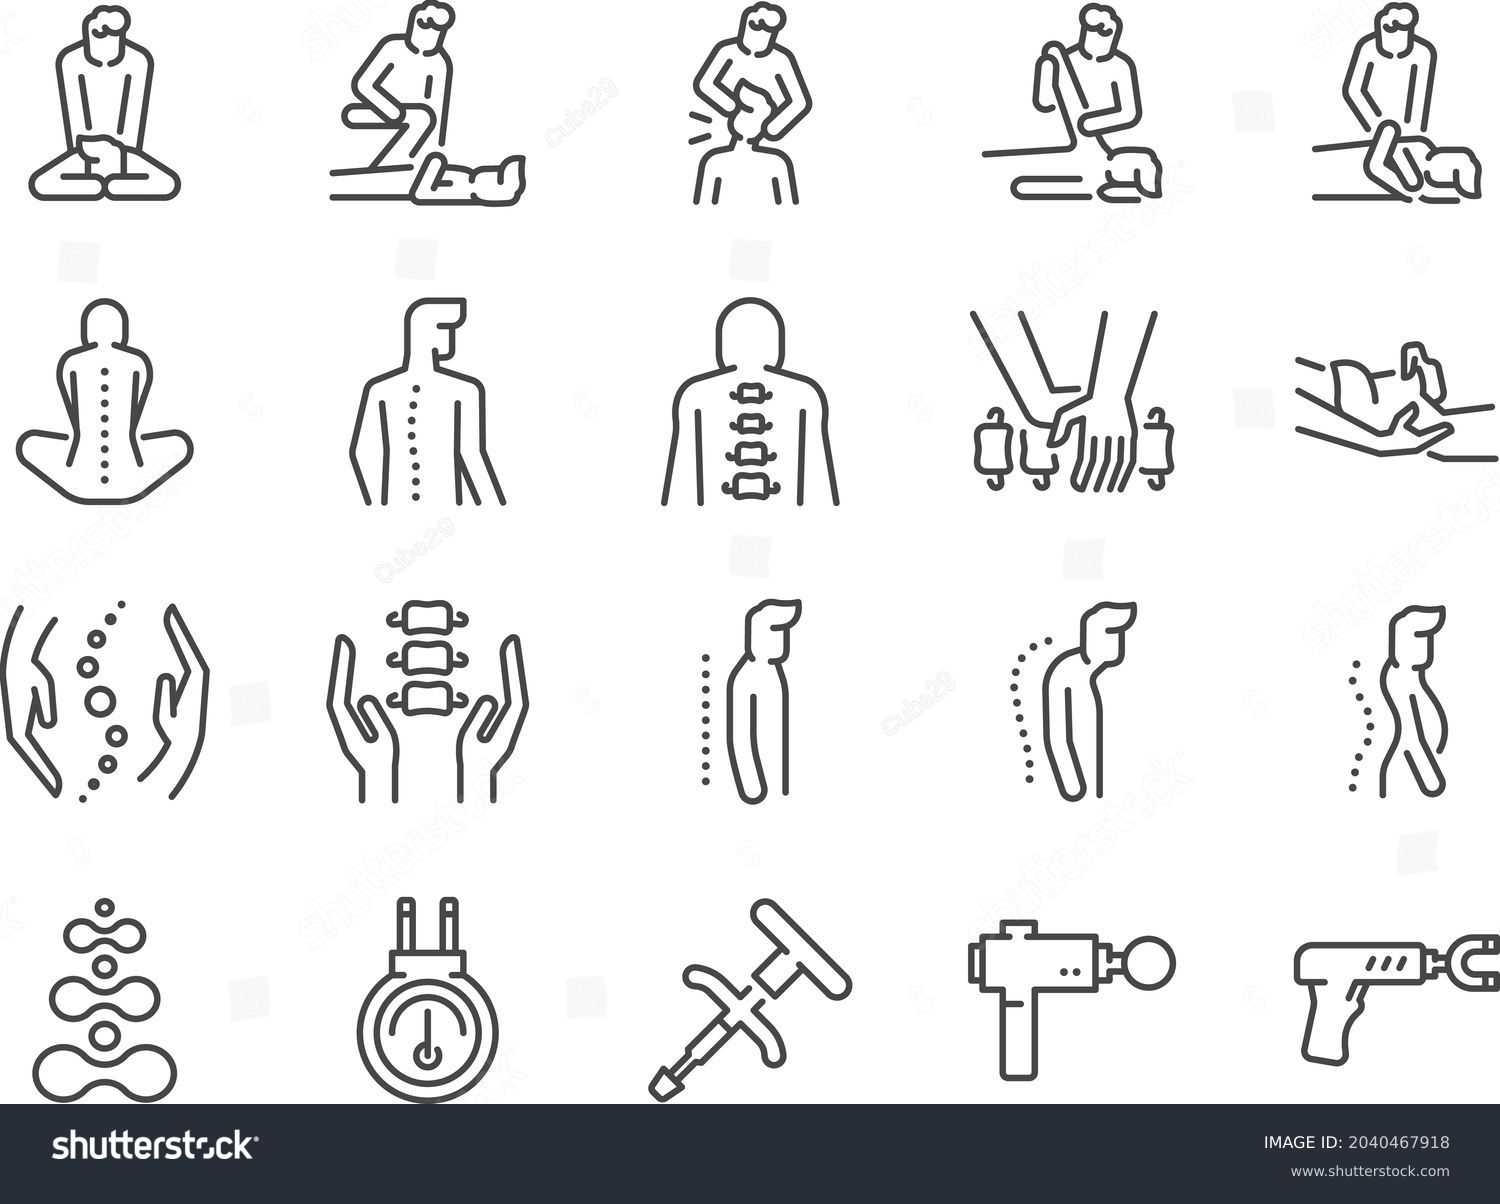 Chiropractic Line Icon Set Included Icons Stock Vector Royalty Free 2040467918 Shutterstock